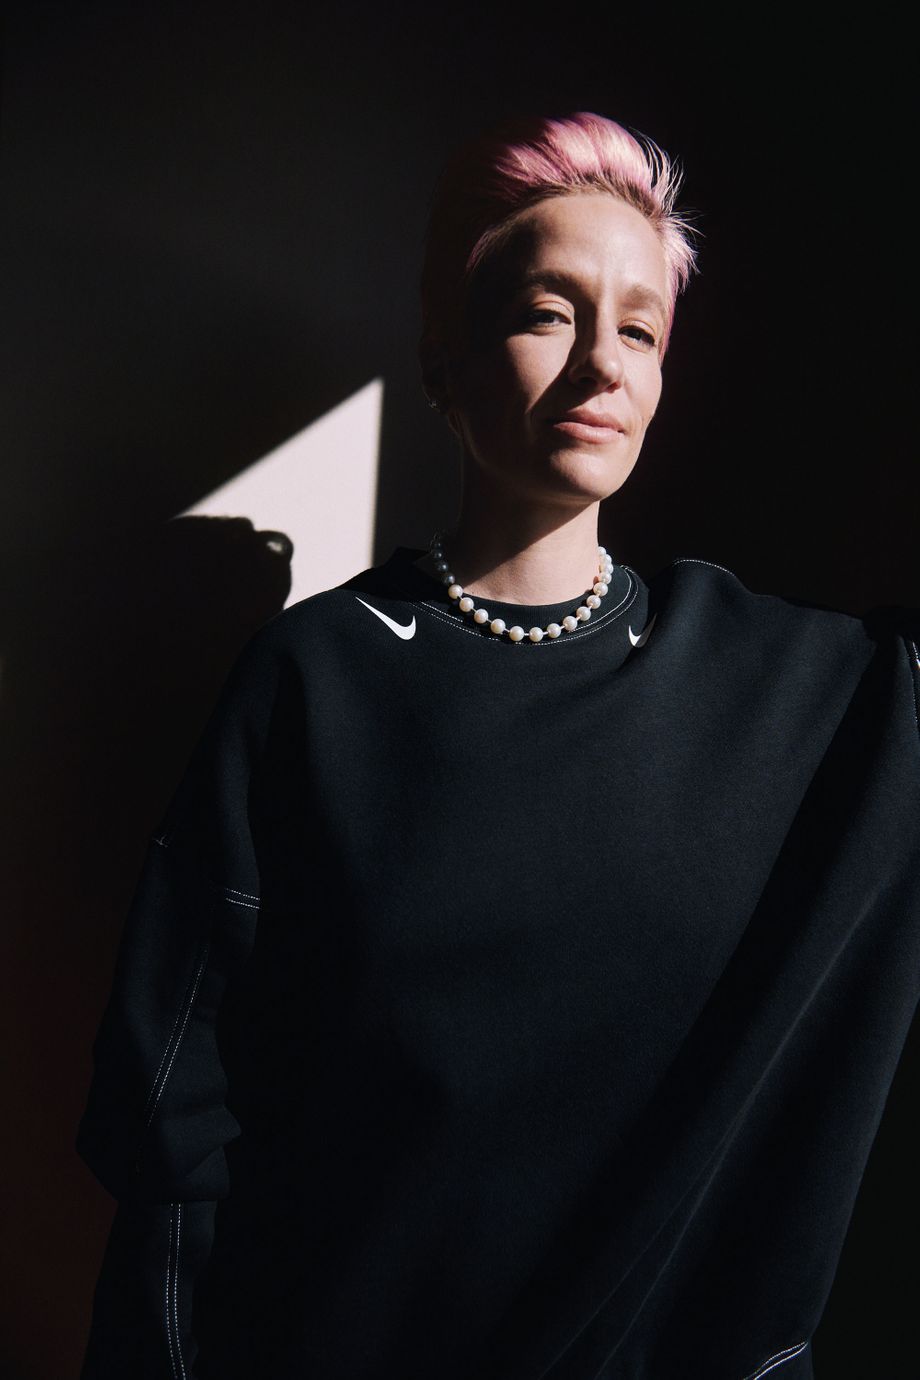 Nike Got Megan Rapinoe a Limited Edition Merchandise After Her World Cup  Victory That Was “Stunting on Everybody” - EssentiallySports